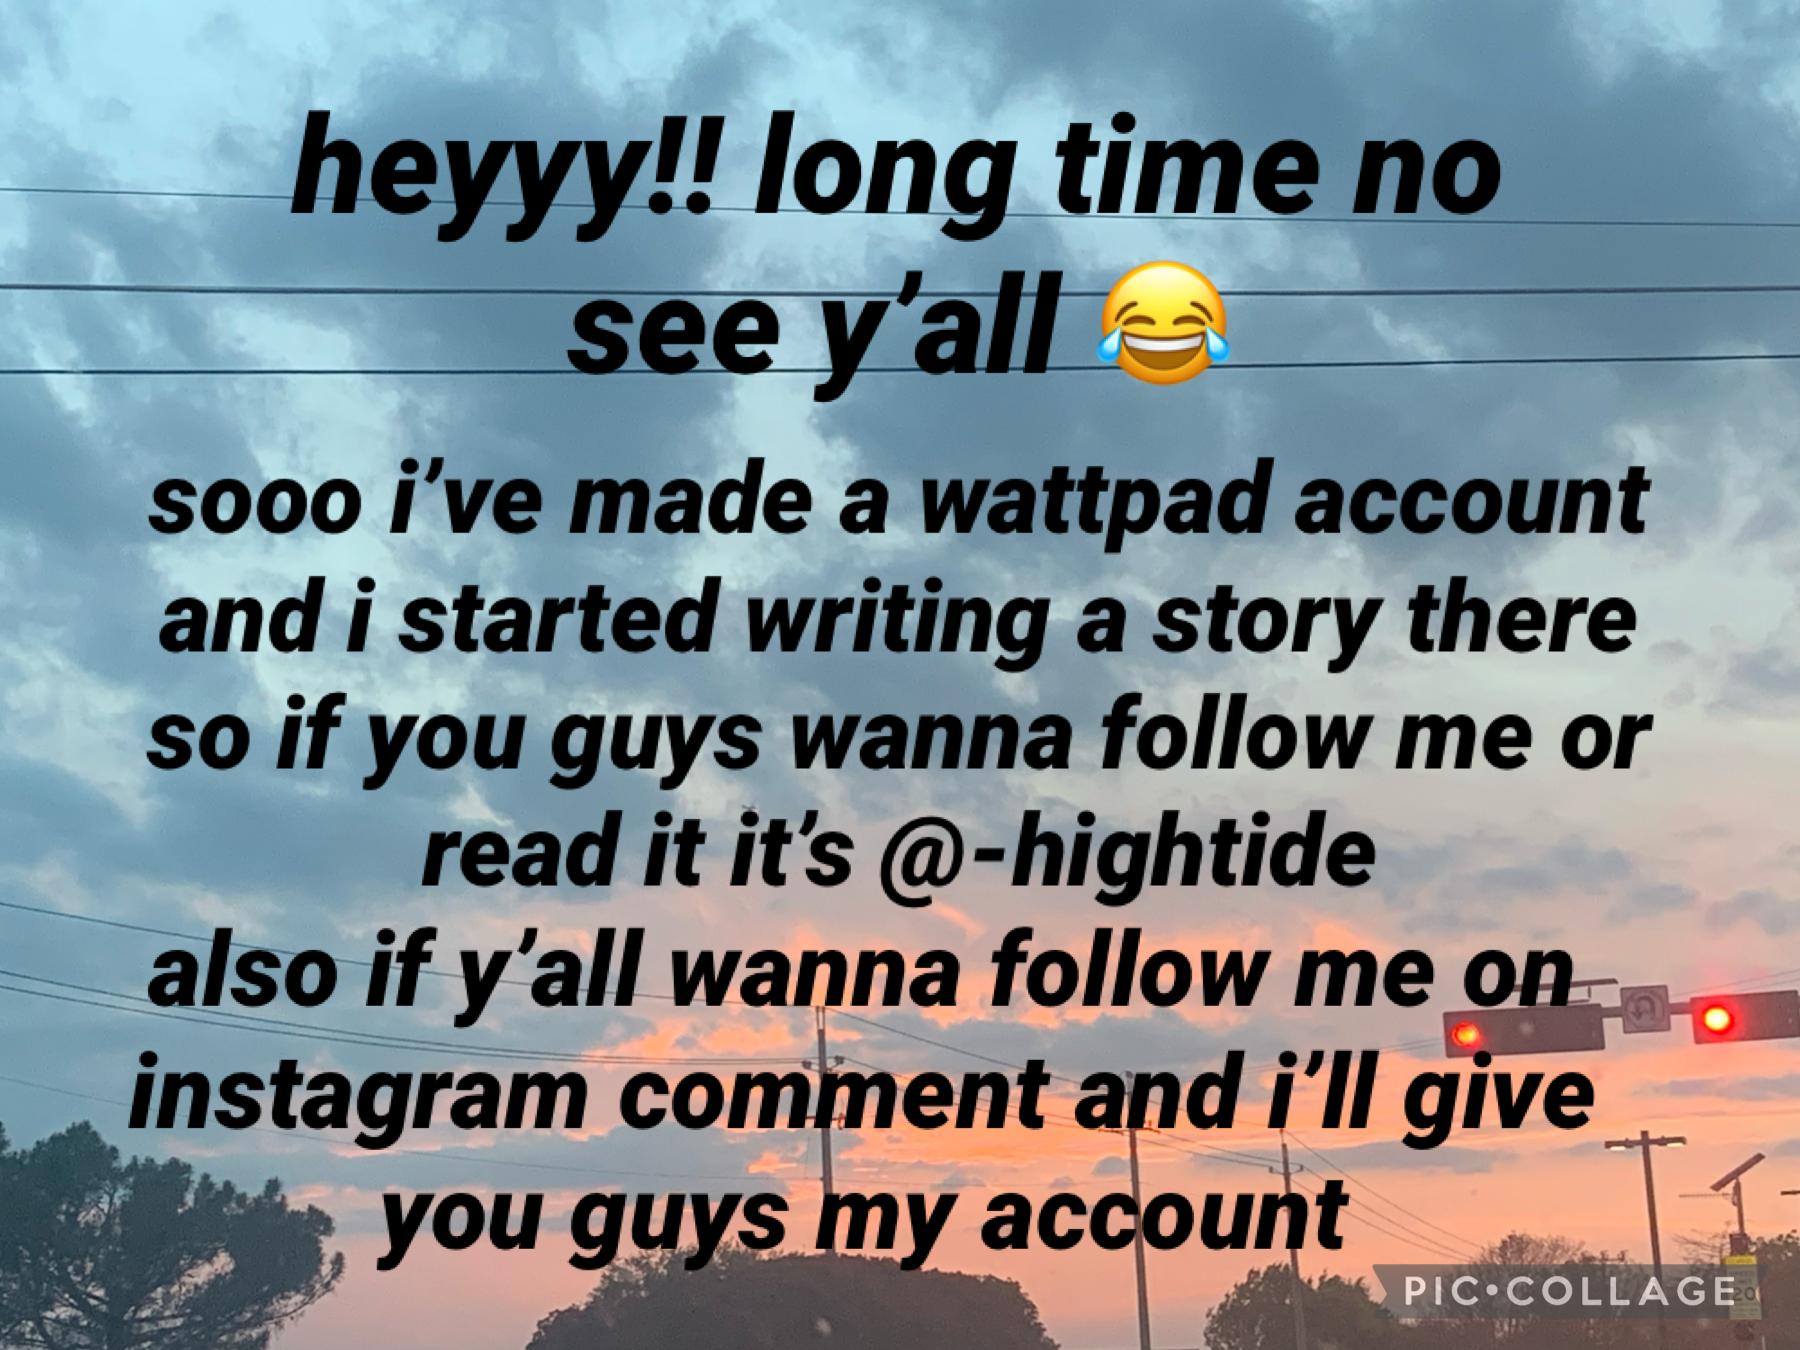 ahhh it’s been so long guys 😩
i’m officially a freshman in 4 days which is crazy haha. anyways i started writing on wattpad for fun so go read my book because the lack of reads is making me sad 🤧 ily so much! also comment if you want my insta 